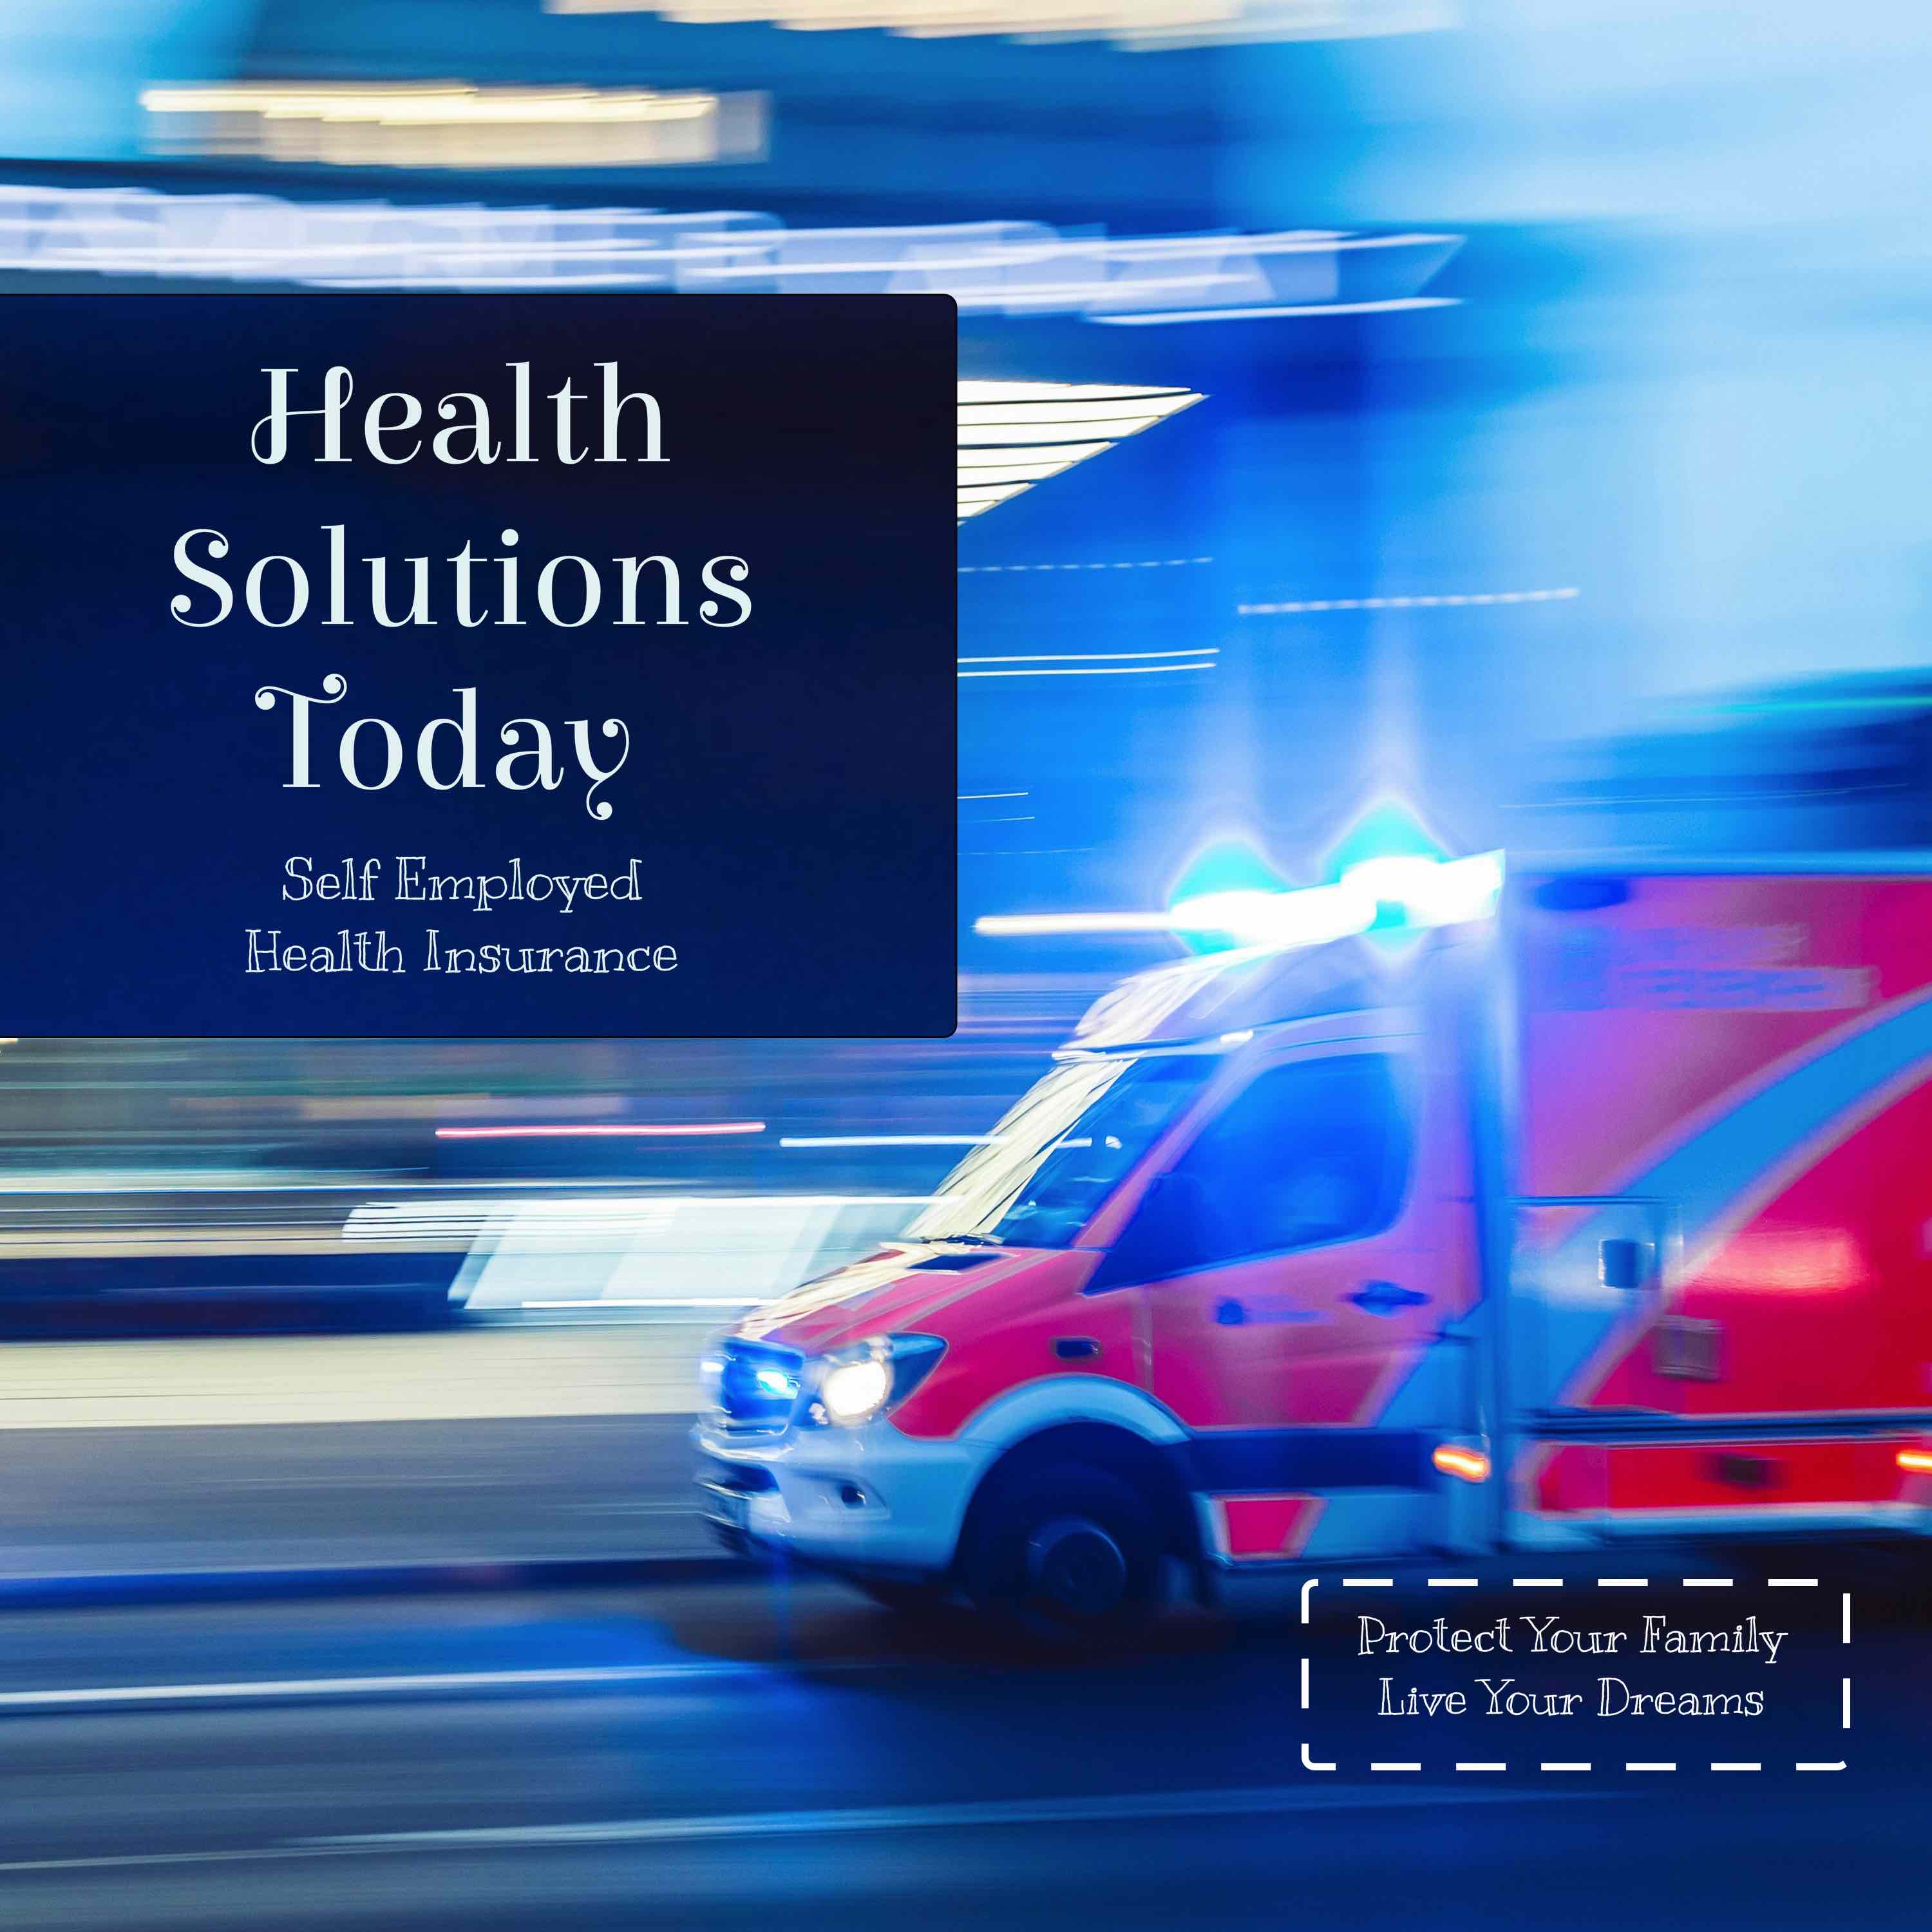 Artwork for Health Solutions Today